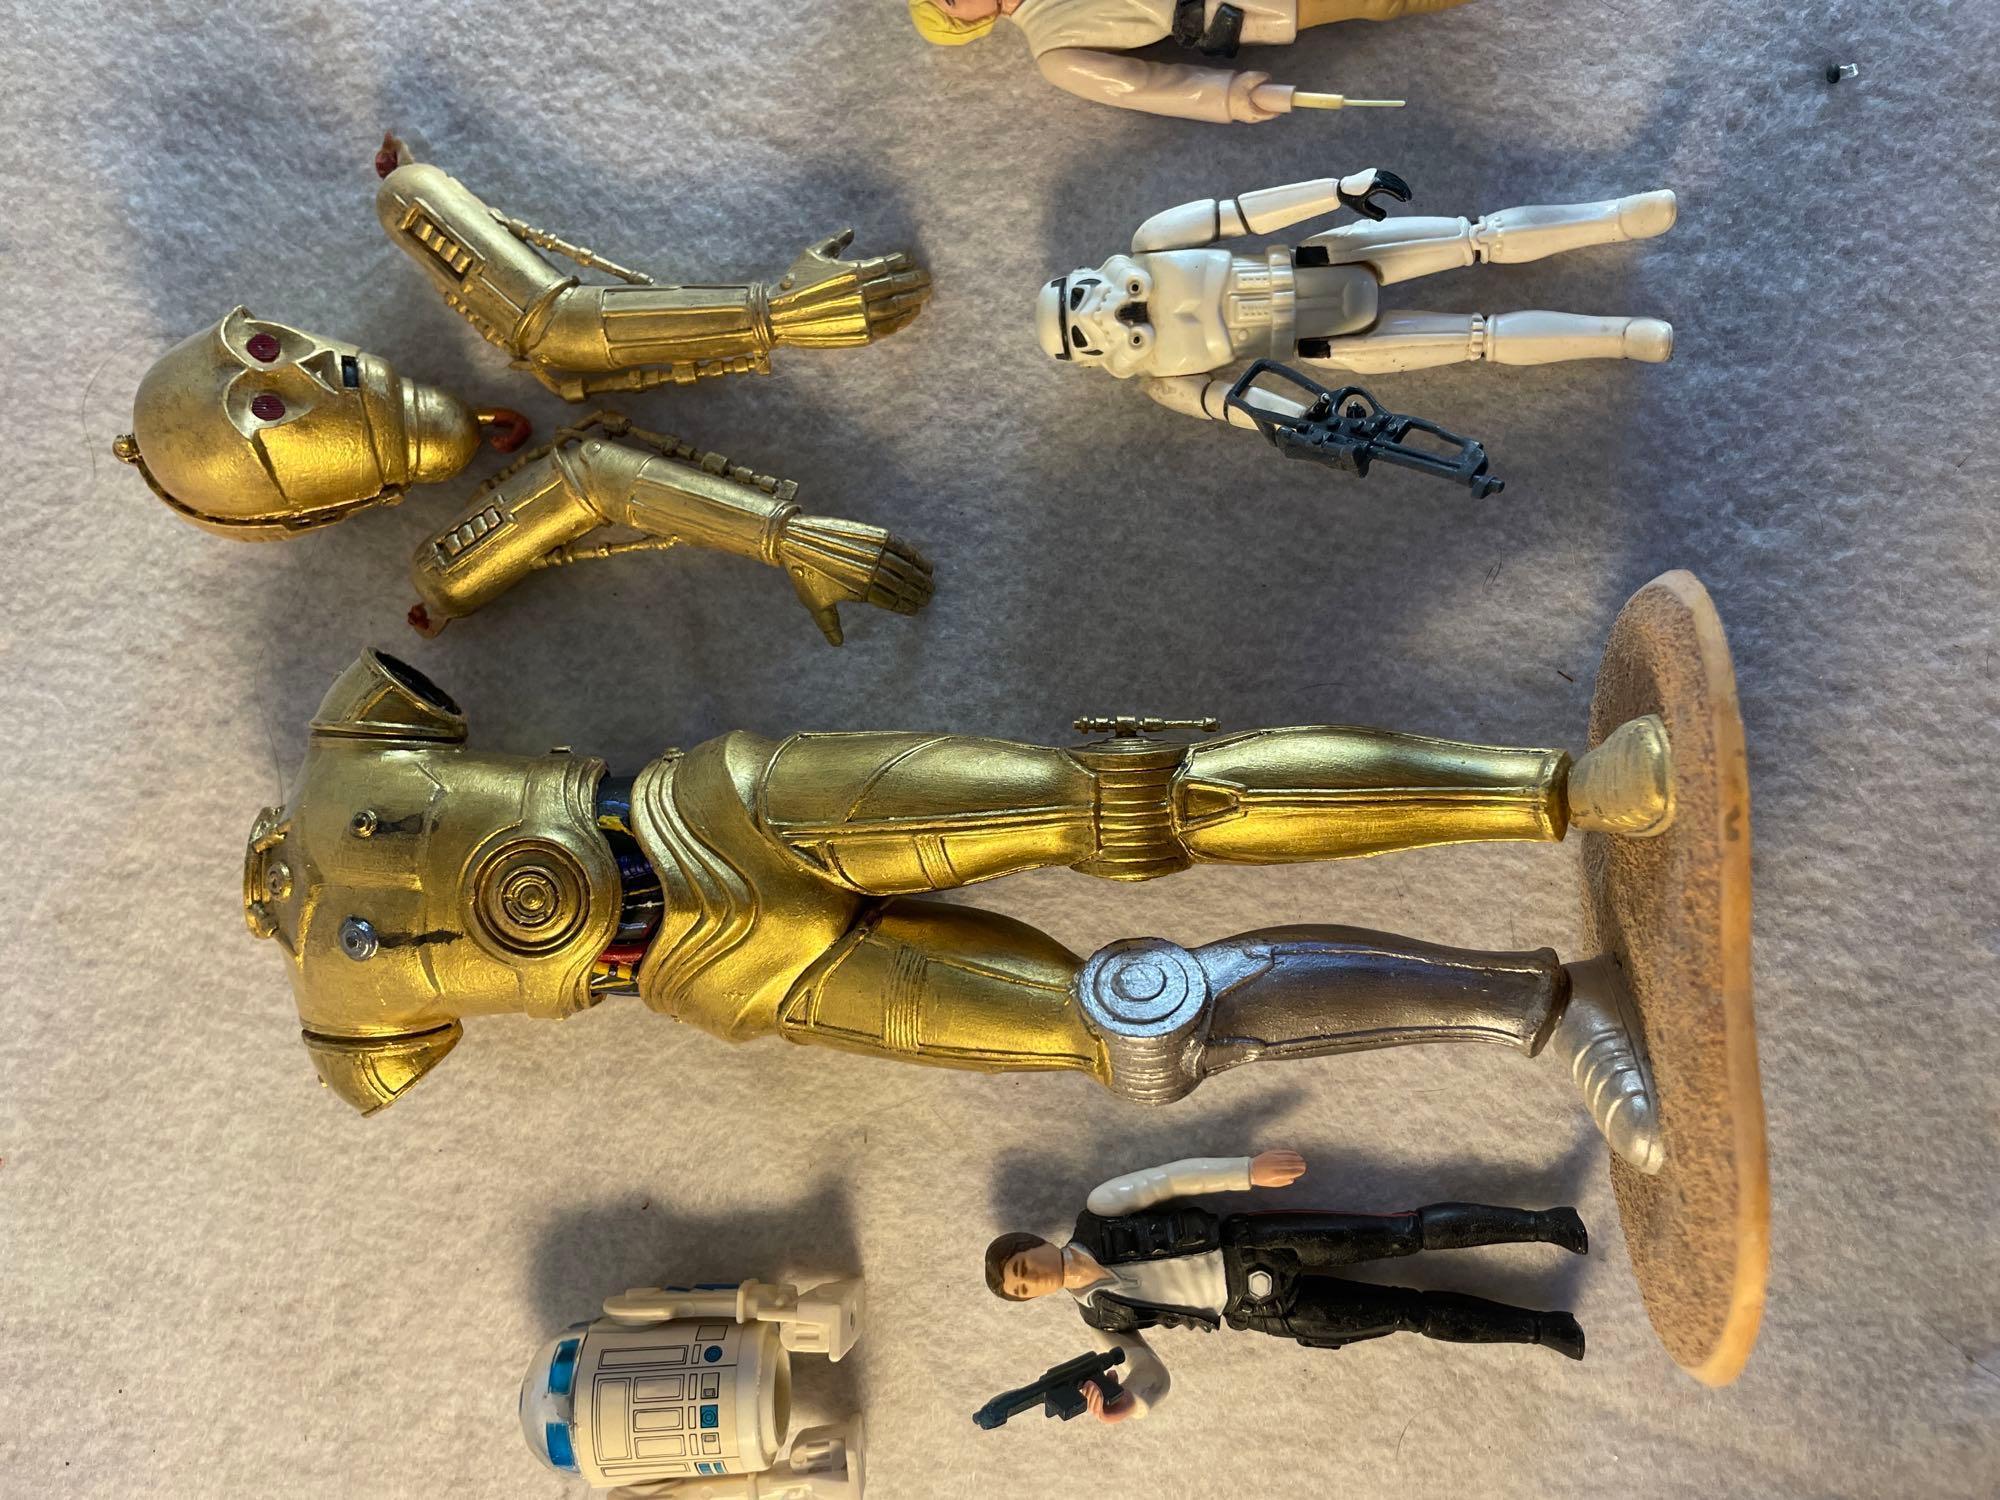 Star Wars Model C-3PO and R2-D2 with Original Action Figures